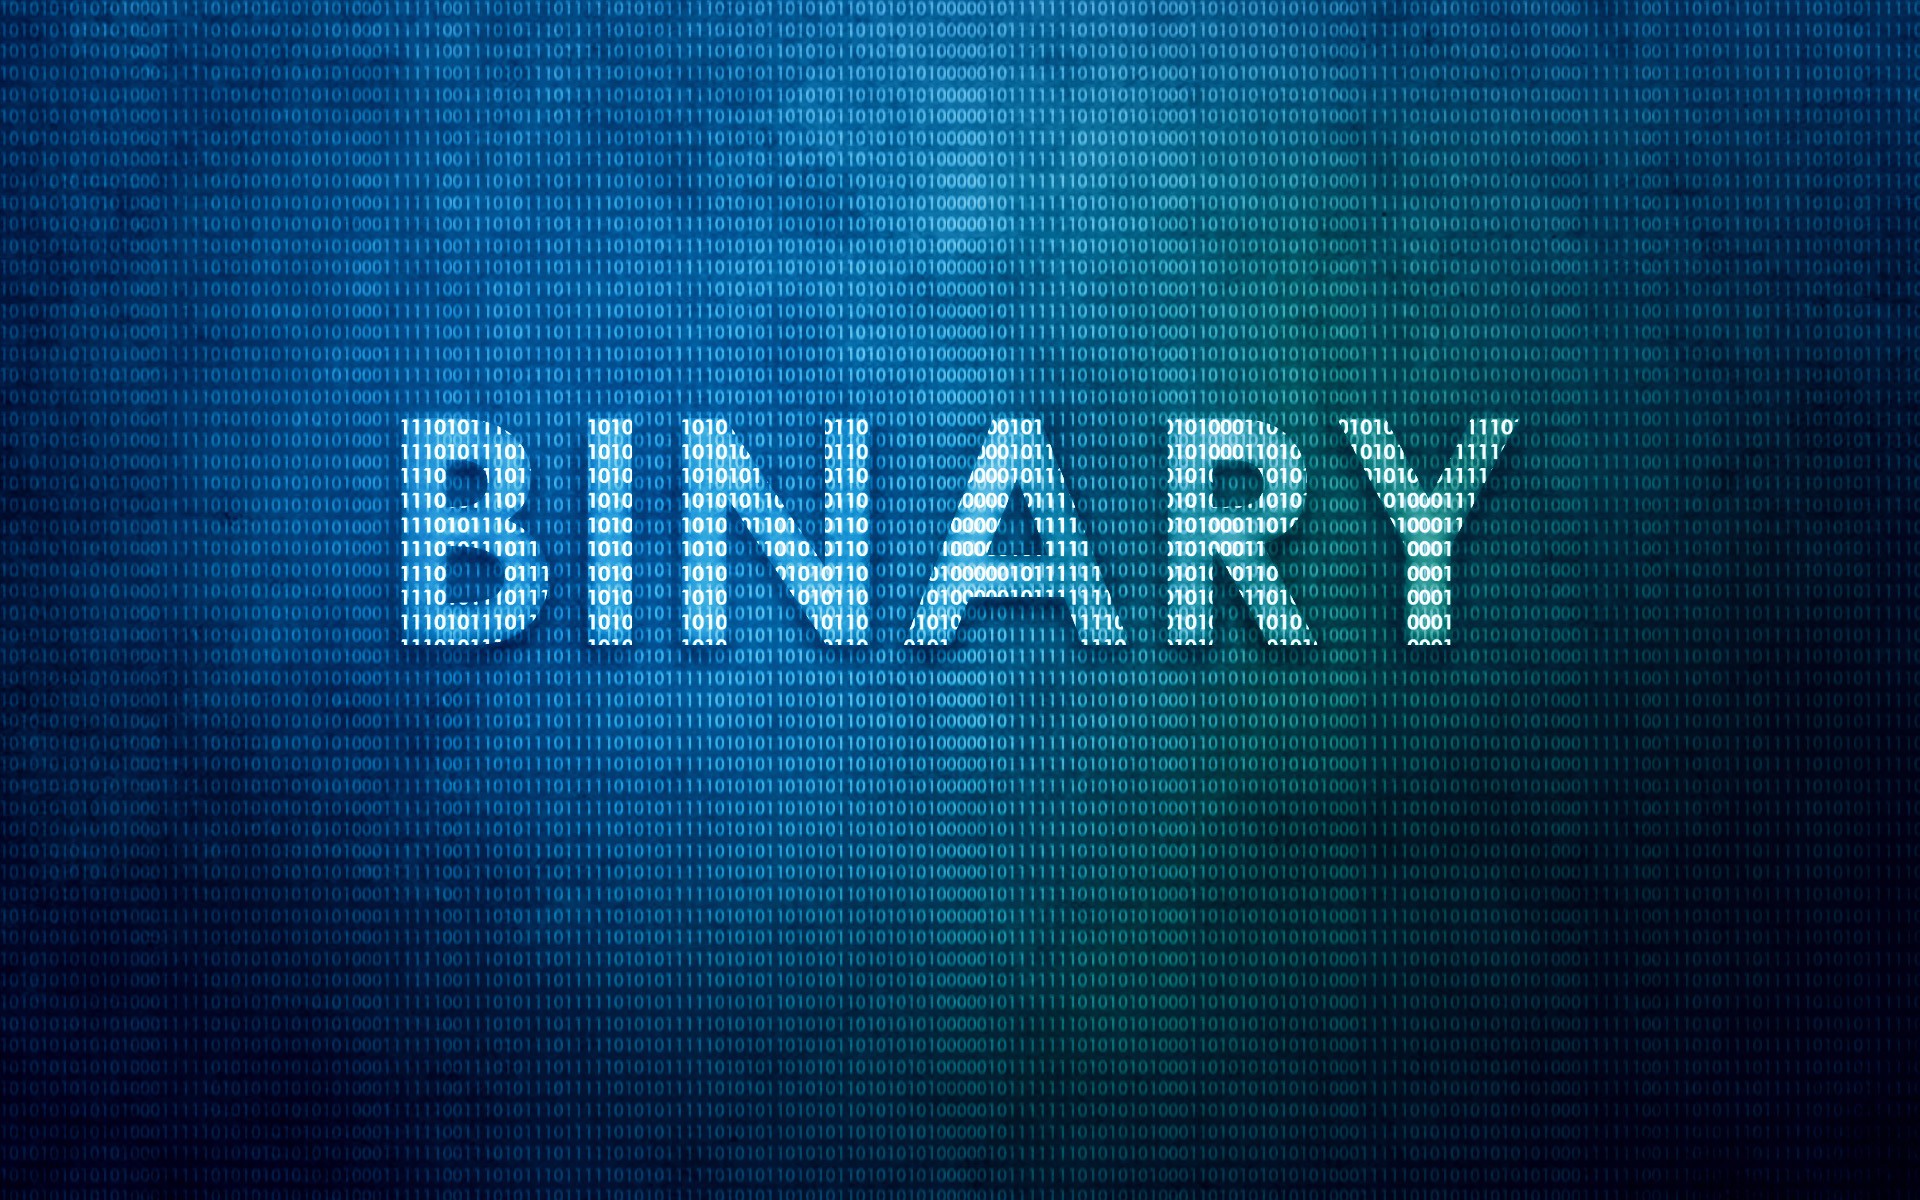 what binary is